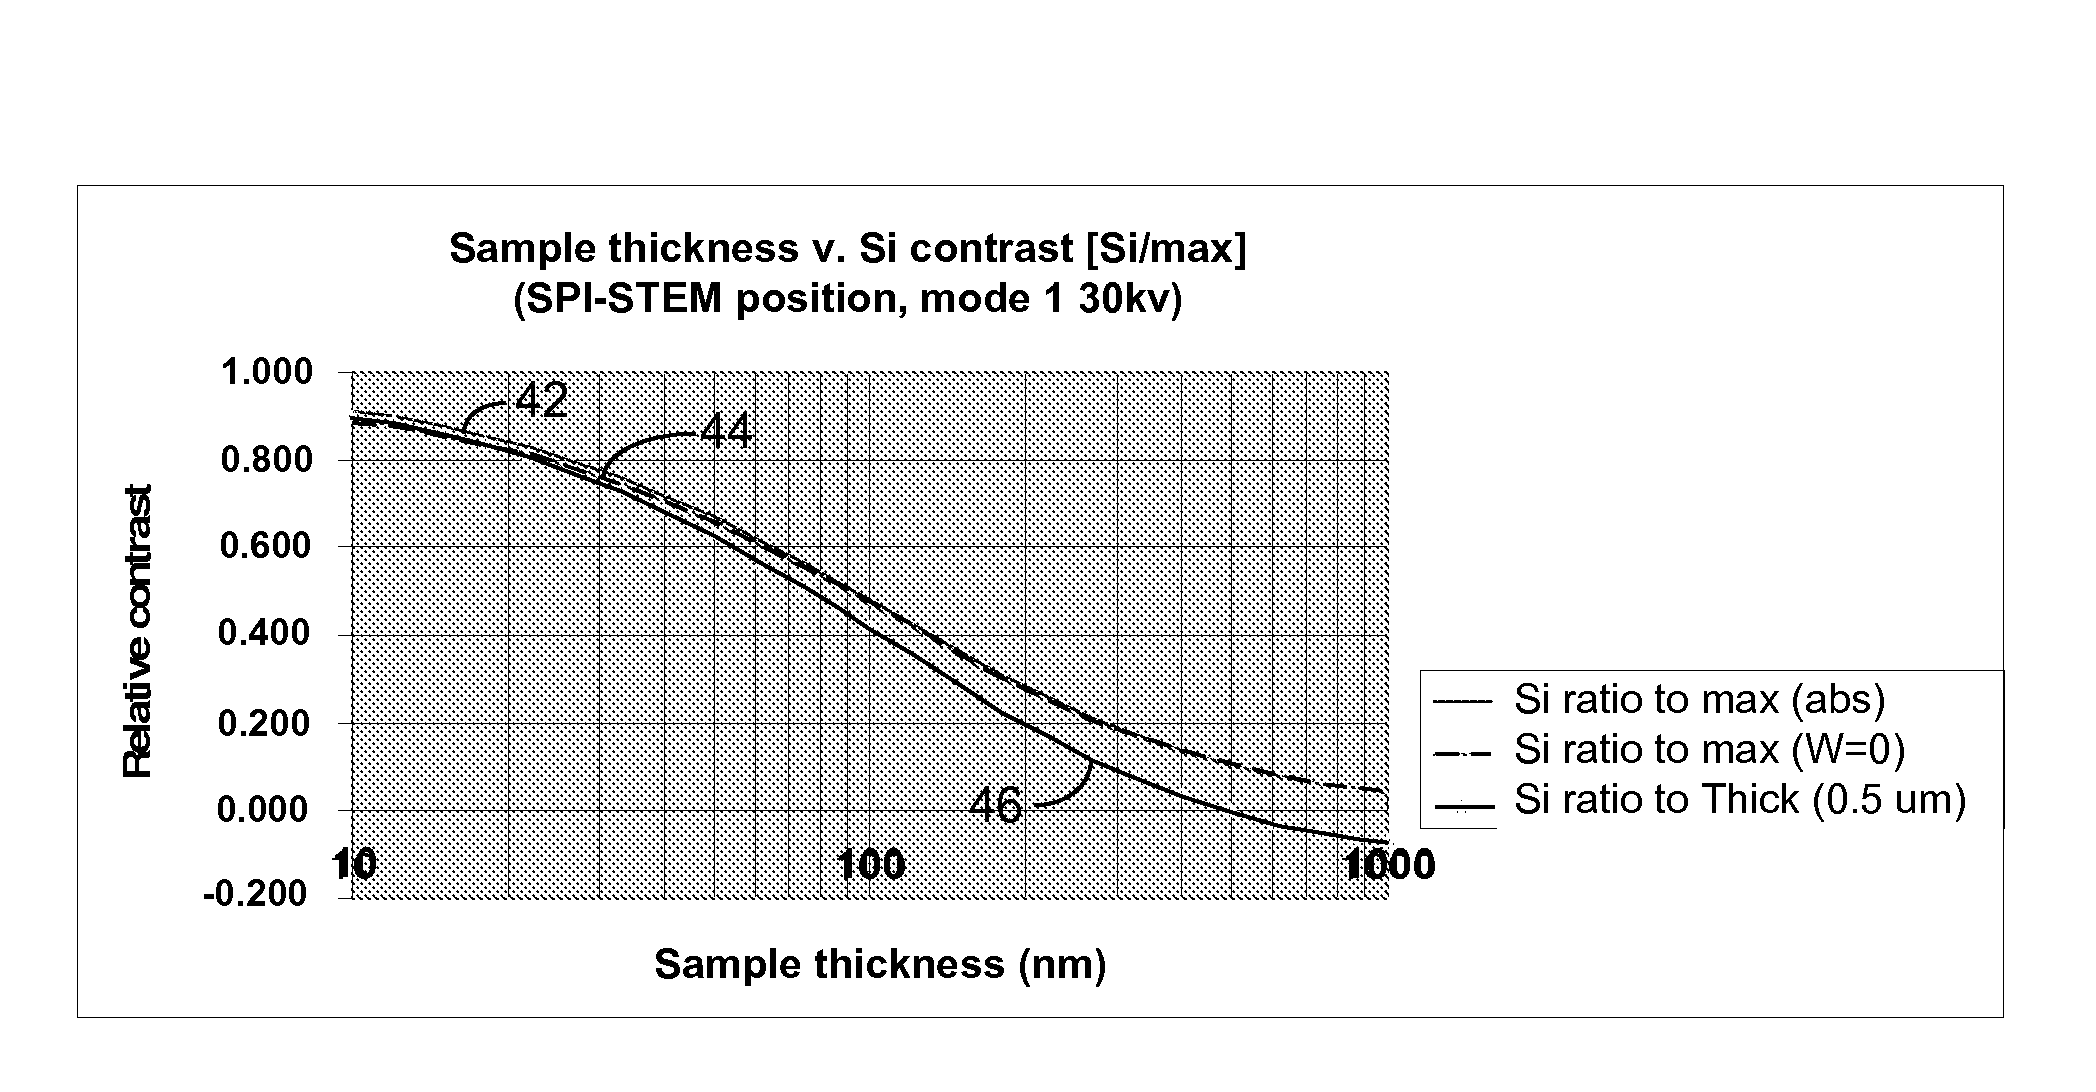 Measurement and endpointing of sample thickness